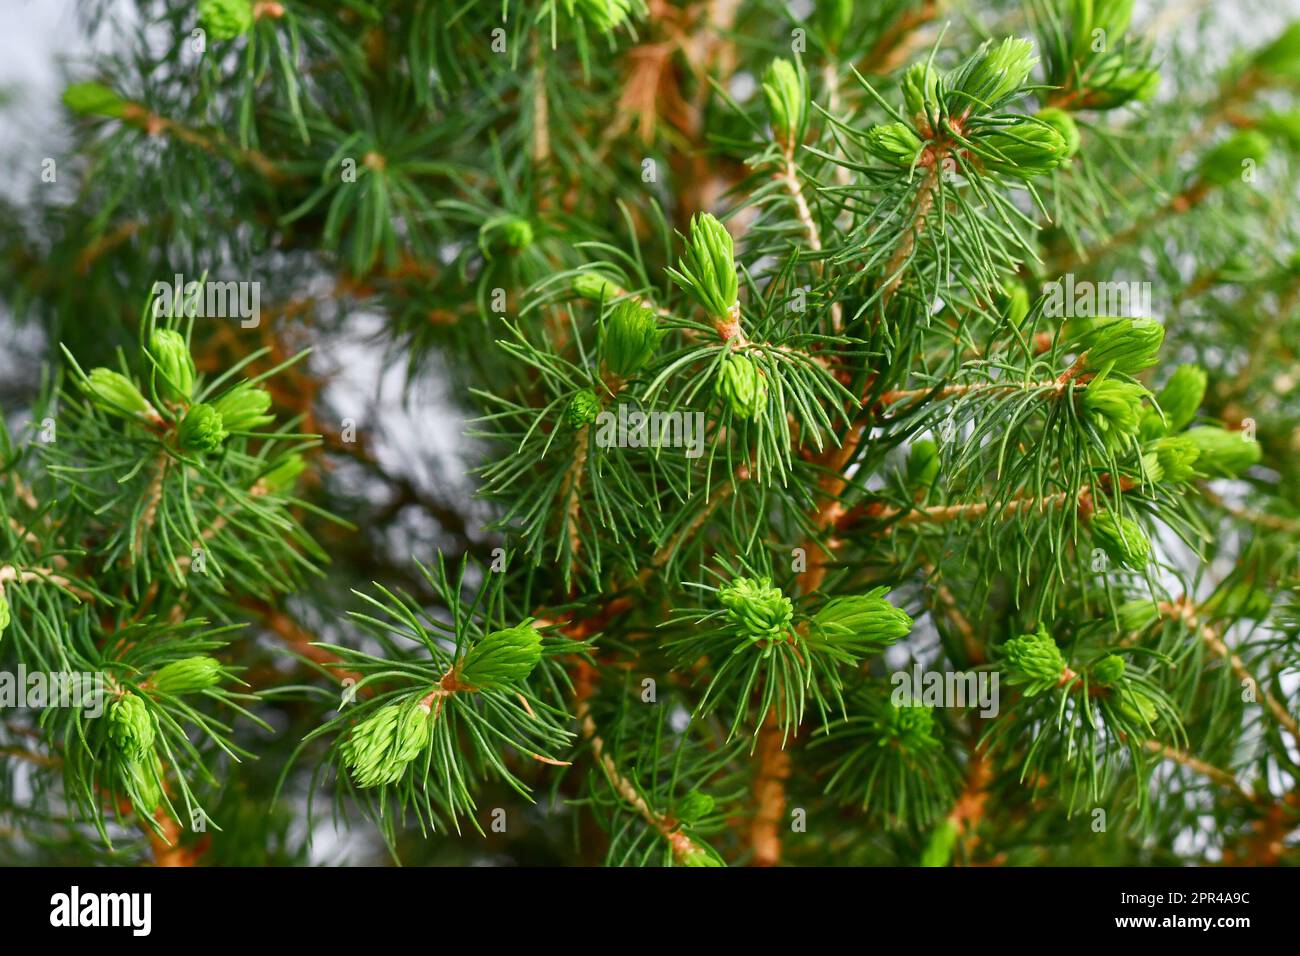 New growth during spring on 'Picea Glauca' spruce tree Stock Photo